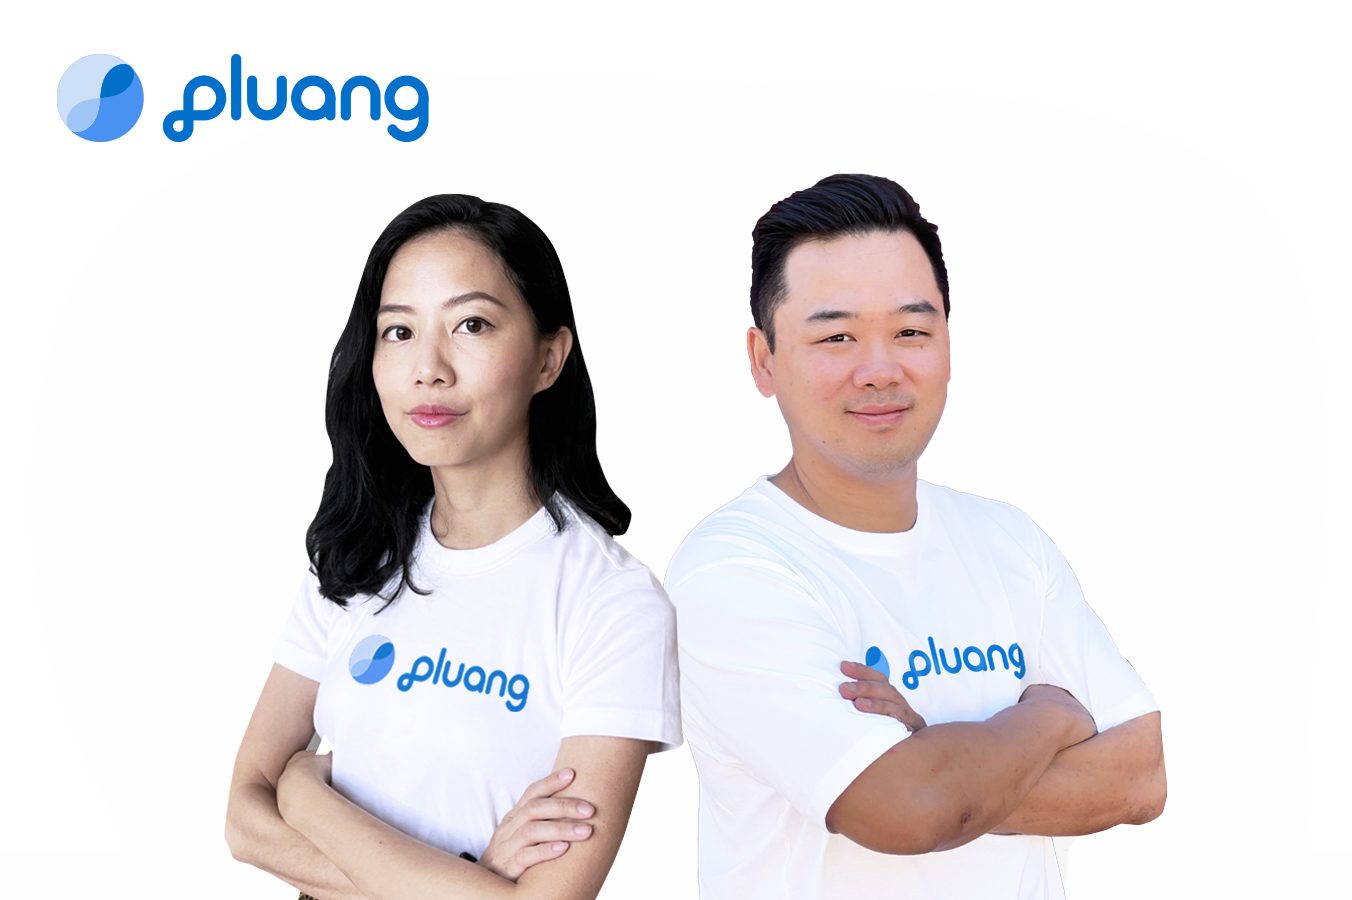 Indonesian wealth tech startup Pluang raises $35m in latest funding